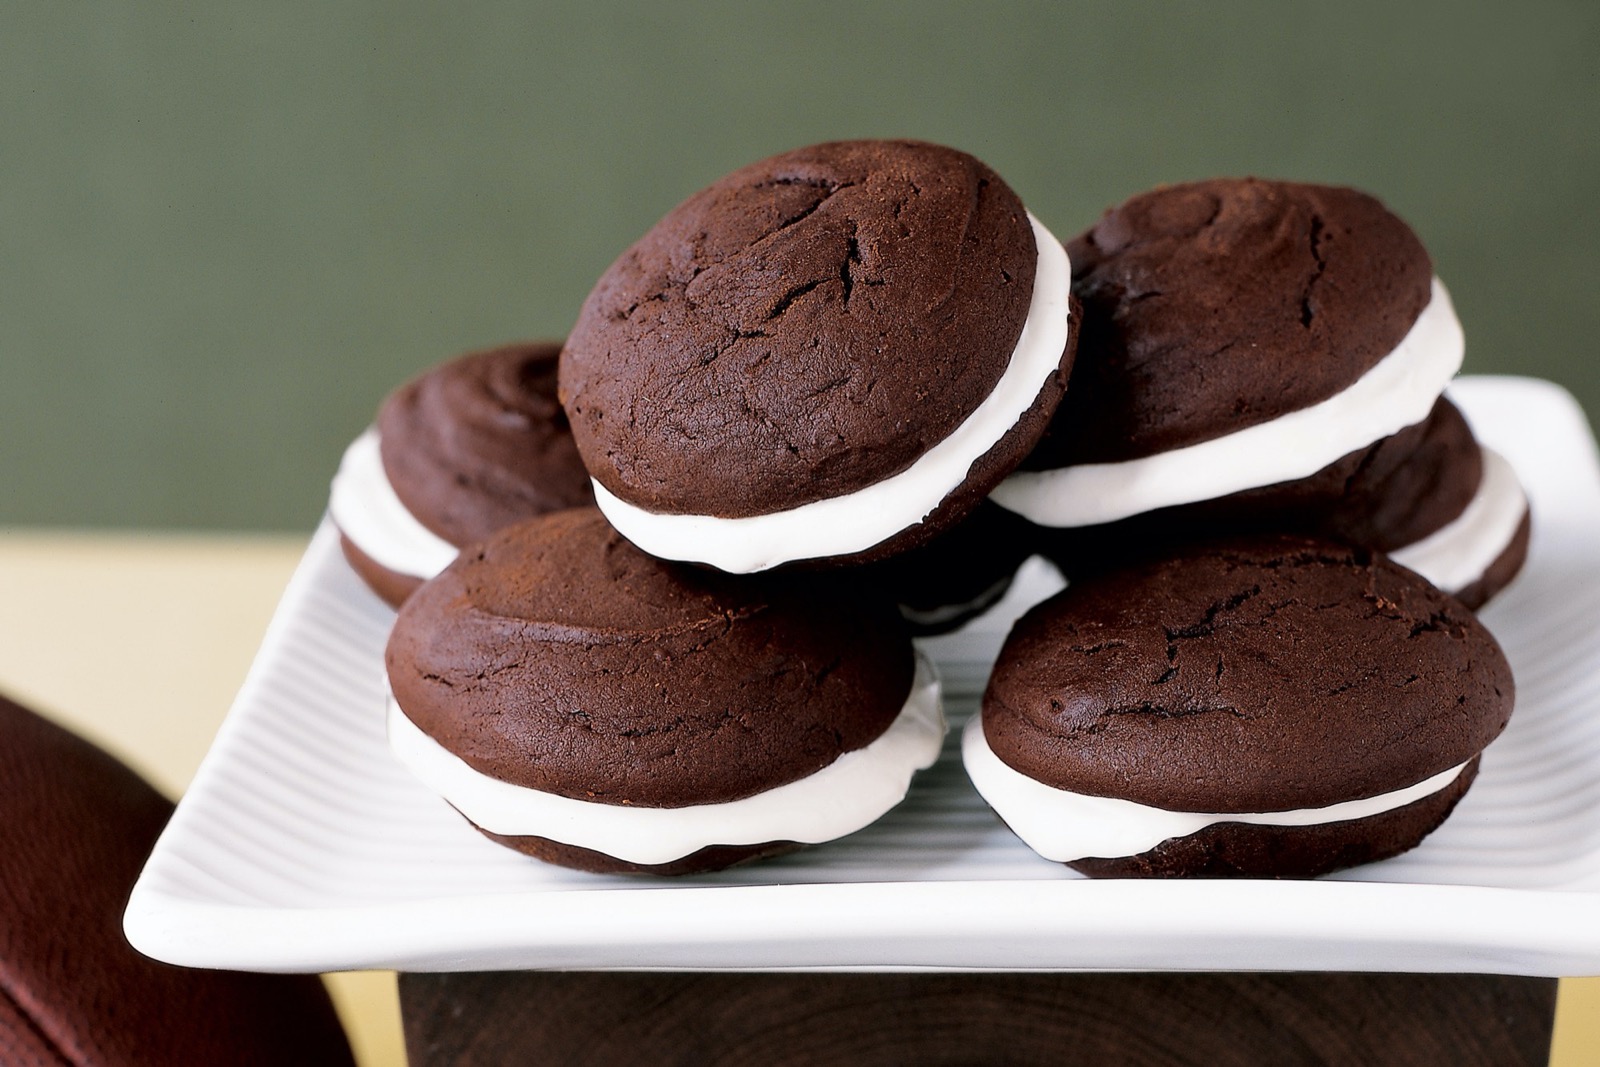 Do You Actually Prefer American or French Desserts? Chocolate Whoopie Pies